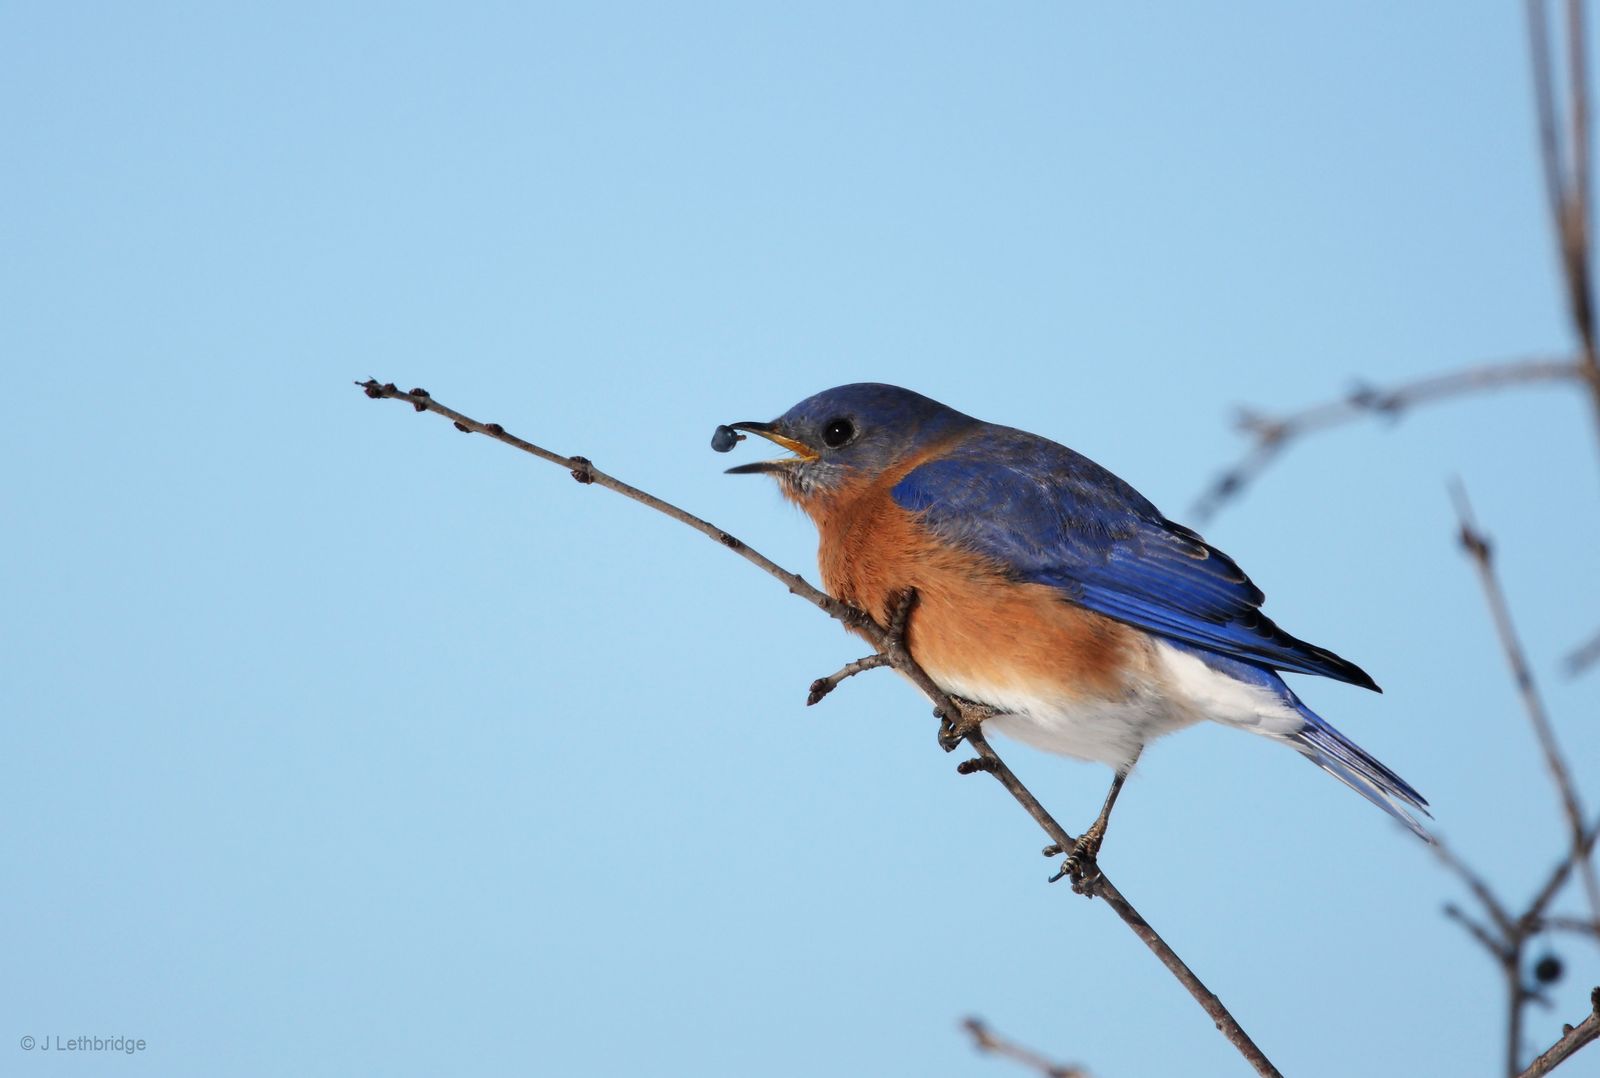 What are the interest rates and penalties with a Bluebird checking account?